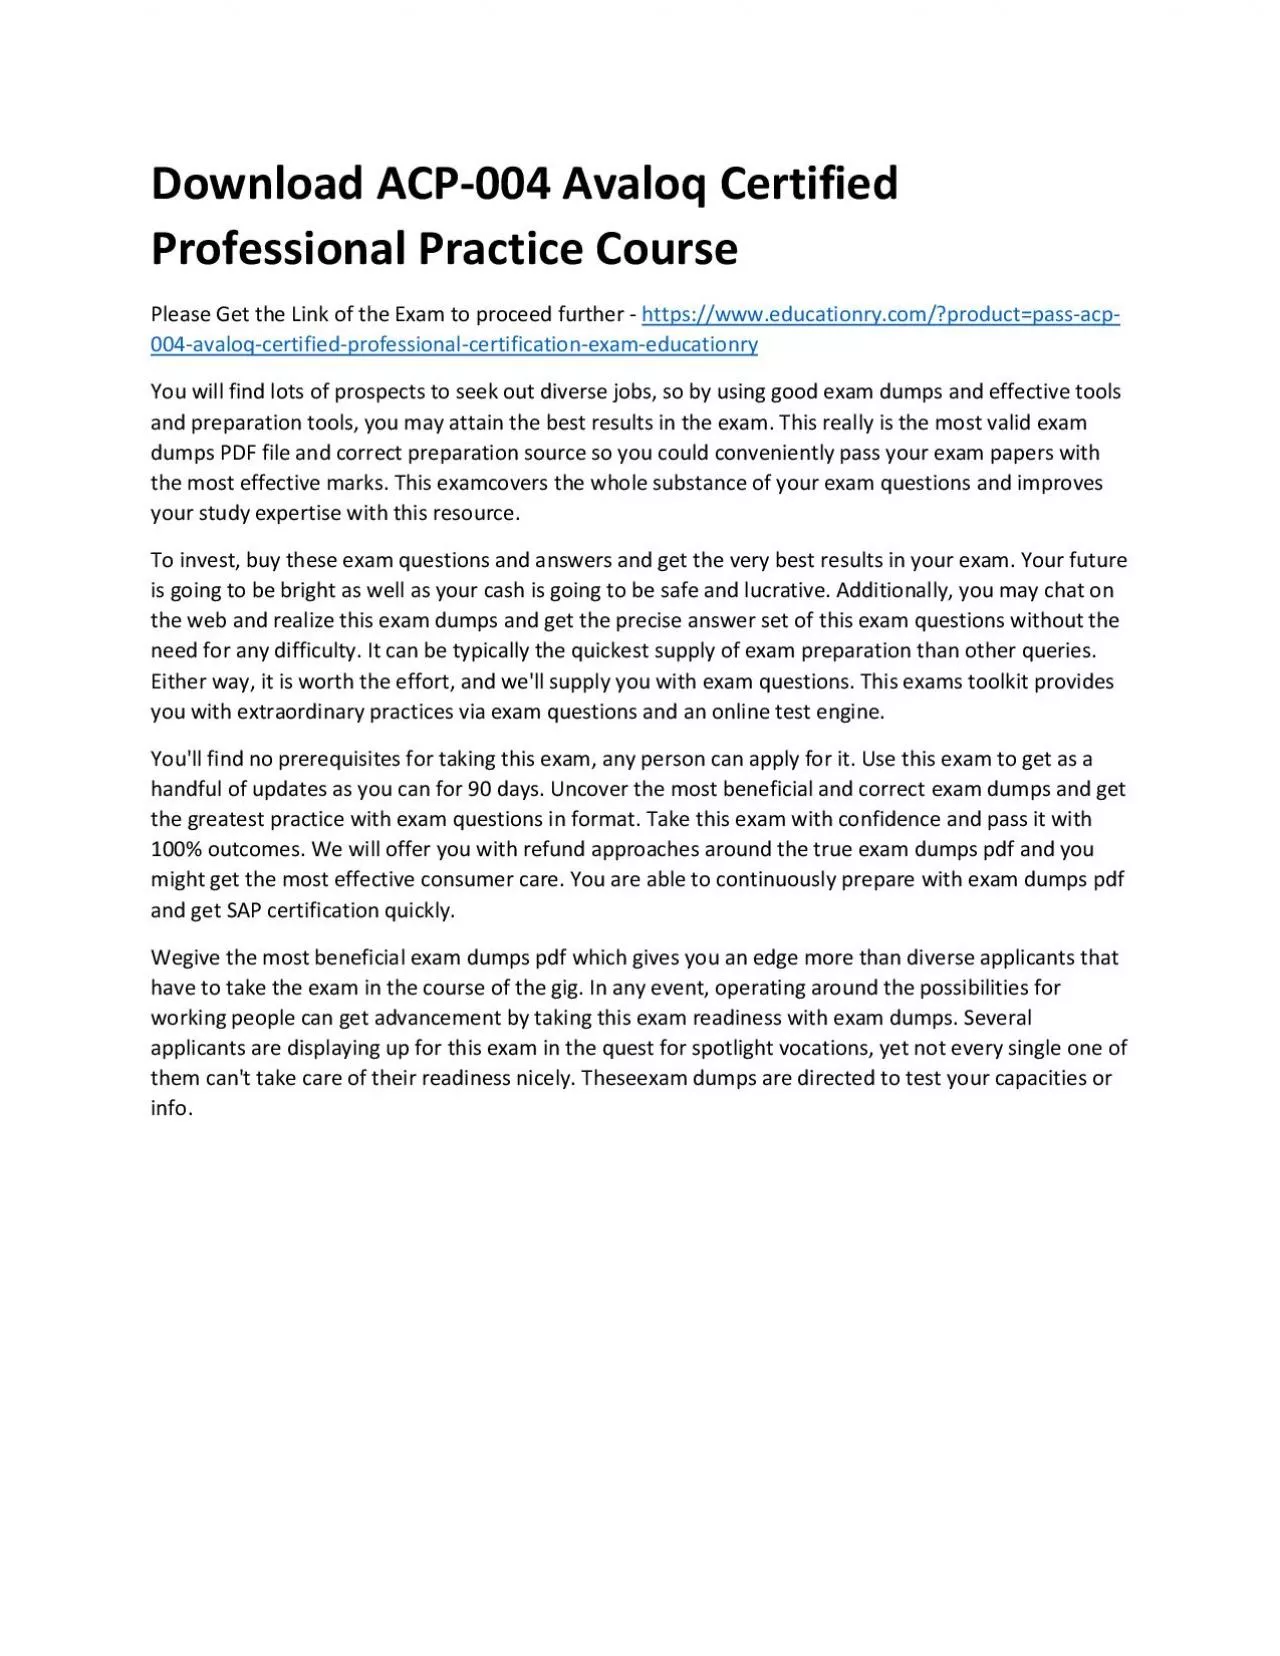 Download ACP-004 Avaloq Certified Professional Practice Course